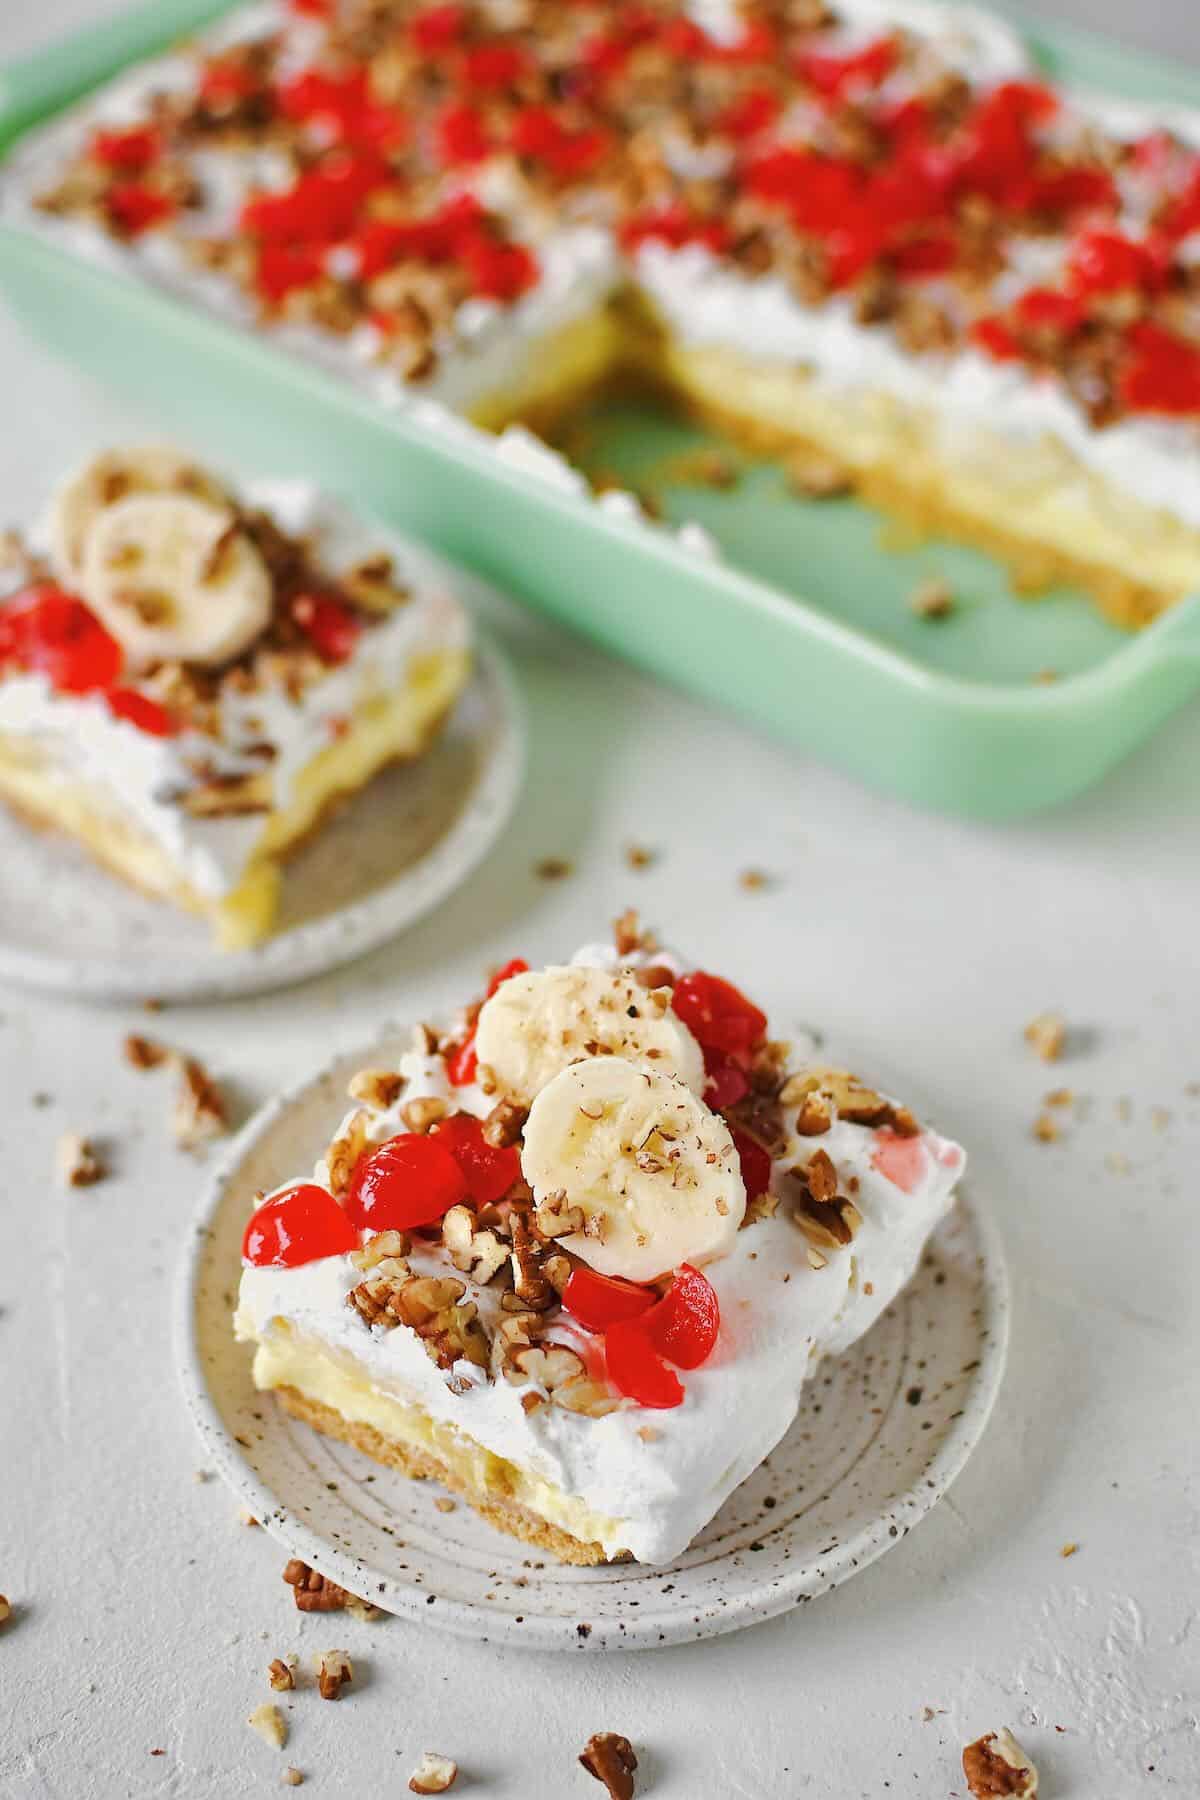 Banana Split Cake in the baking dish, a couple of slices removed and ready to eat that have been topped with banana slices just before serving.